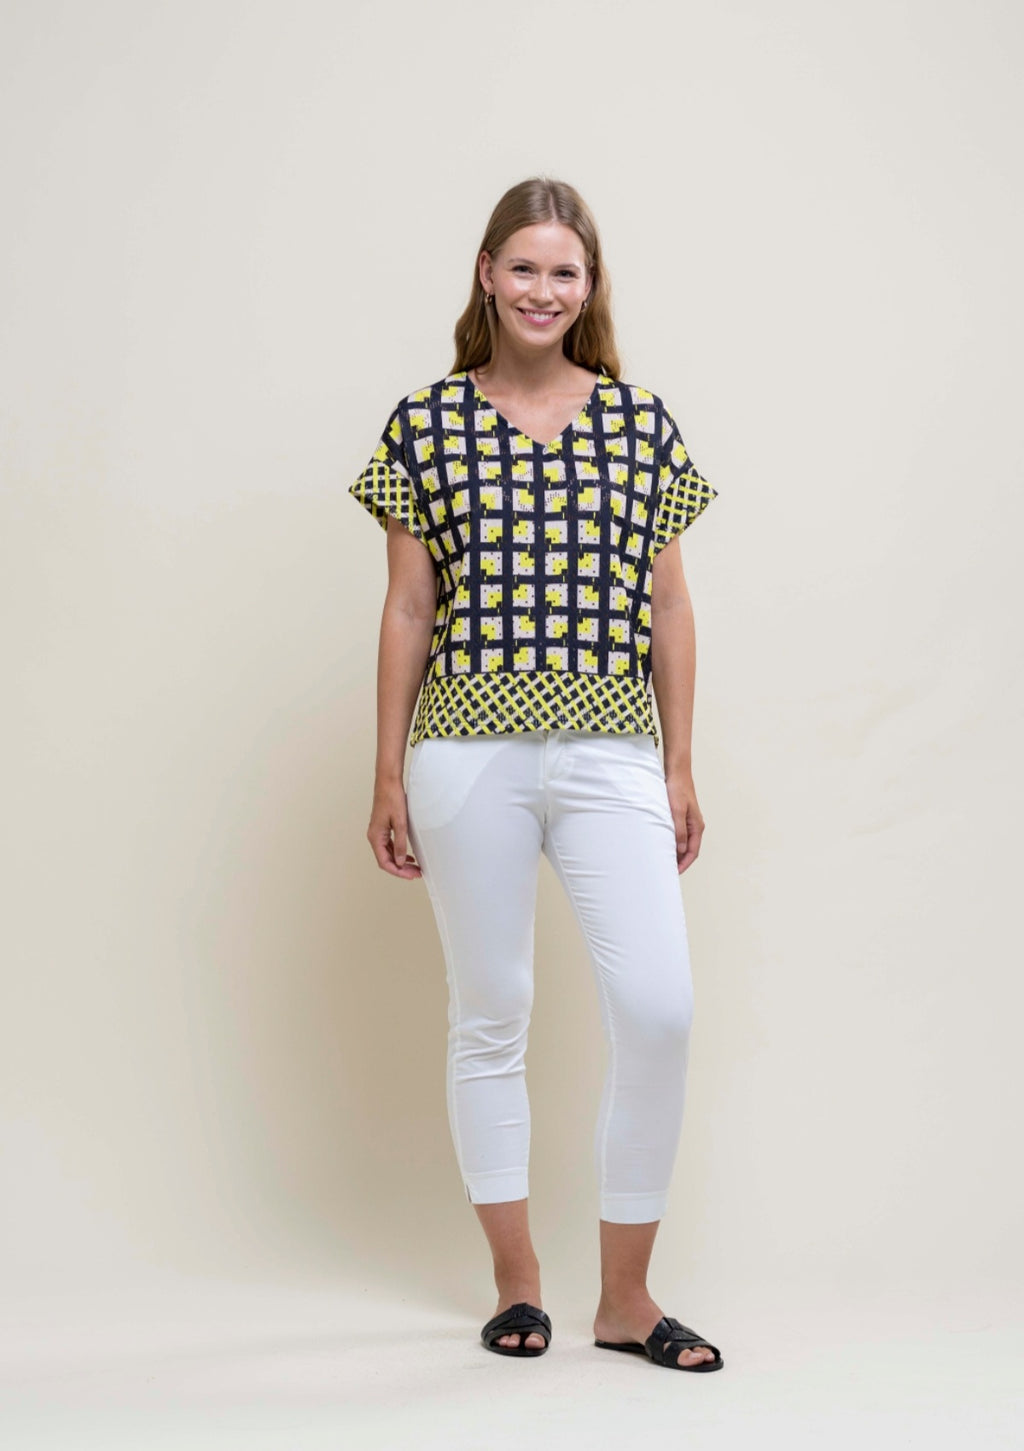 Hongo square pattern perforated v-neck top in navy and lime, product code 6253 H025